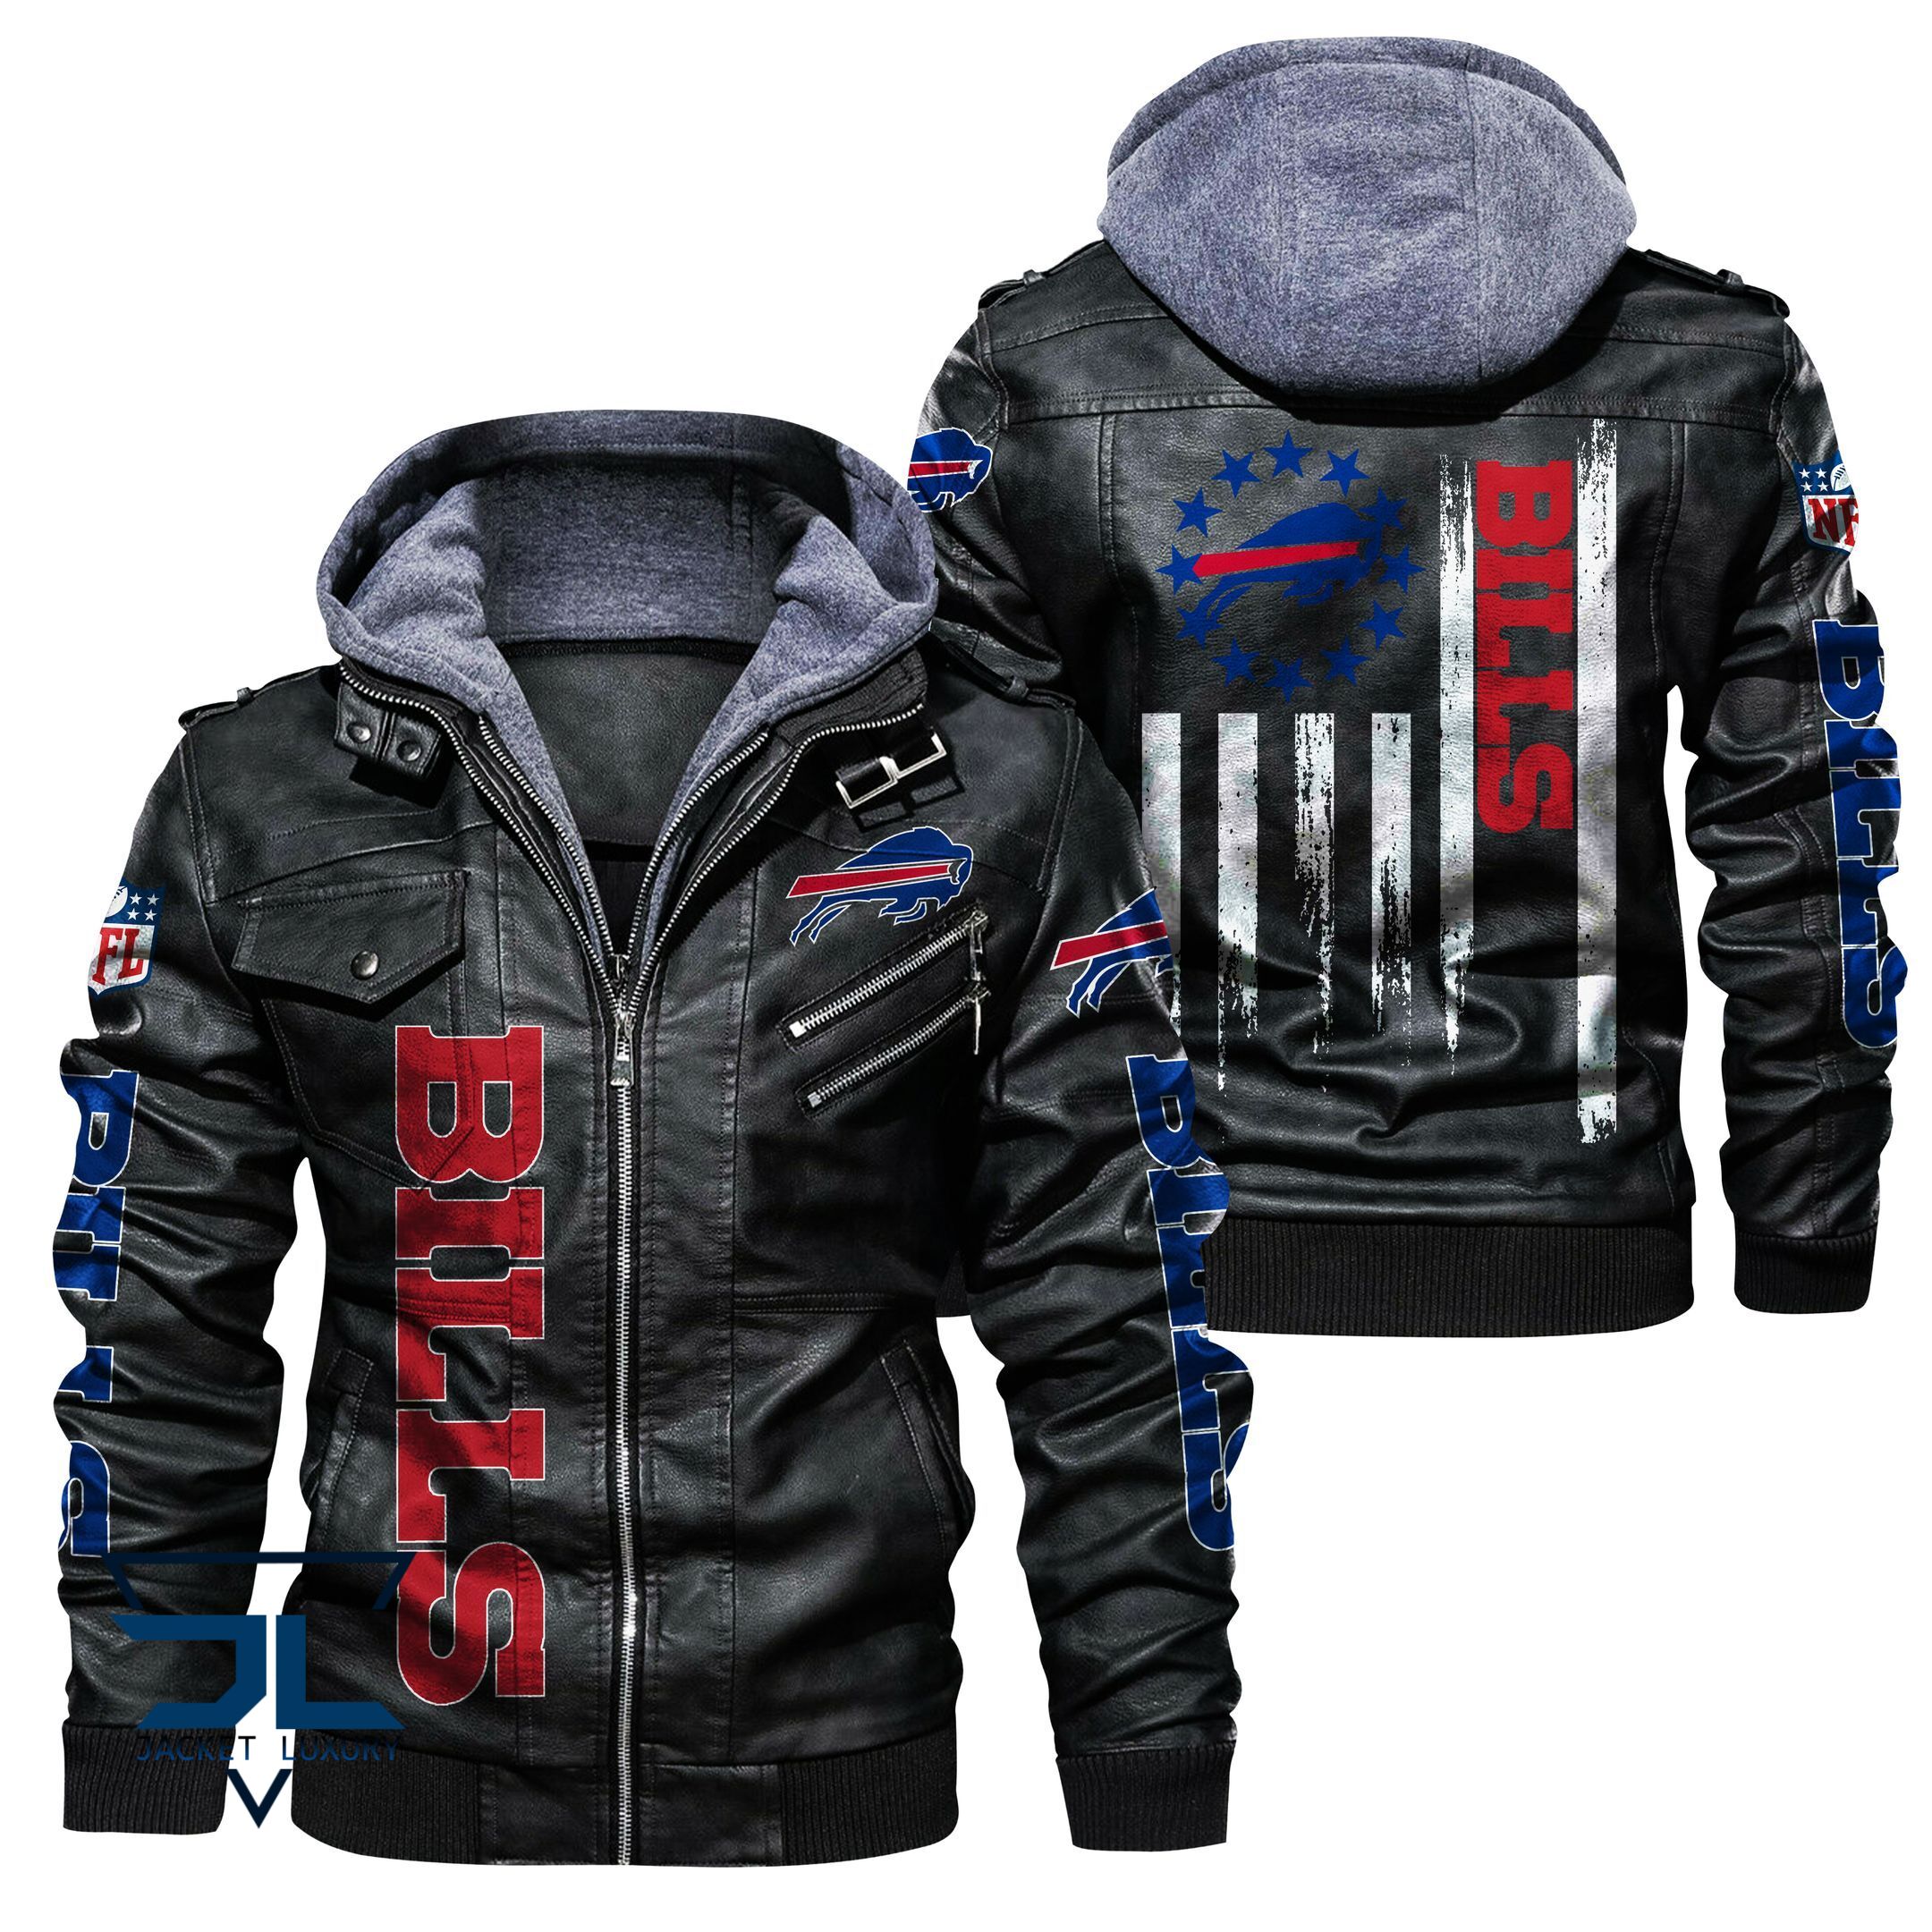 100+ best selling leather jacket on Tezostore 2022 205